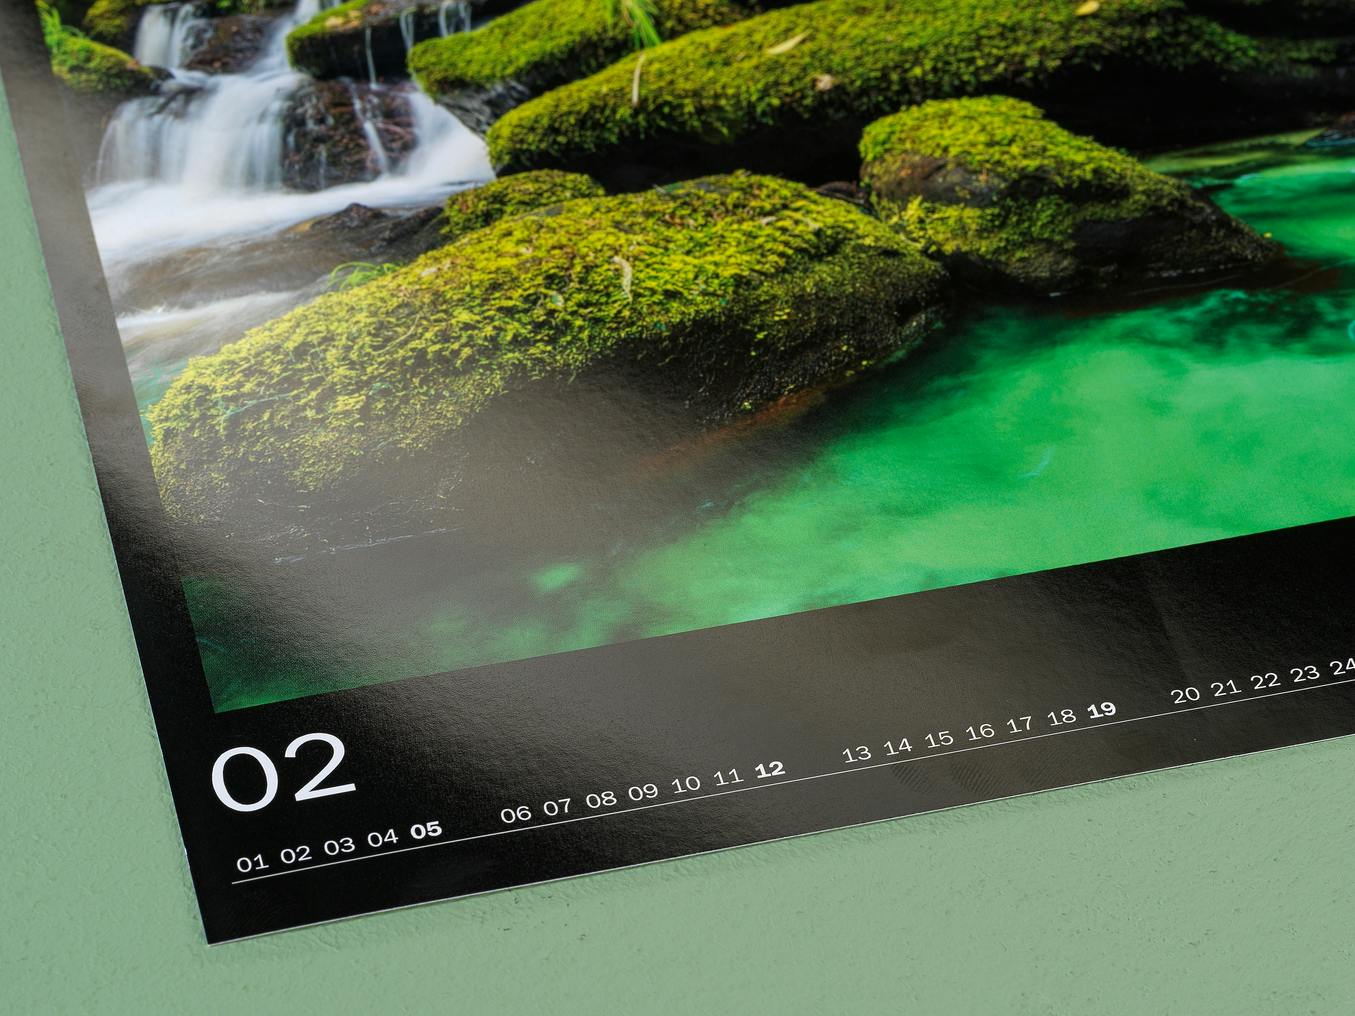 Detailed view of a photo calendar with premium paper glossy